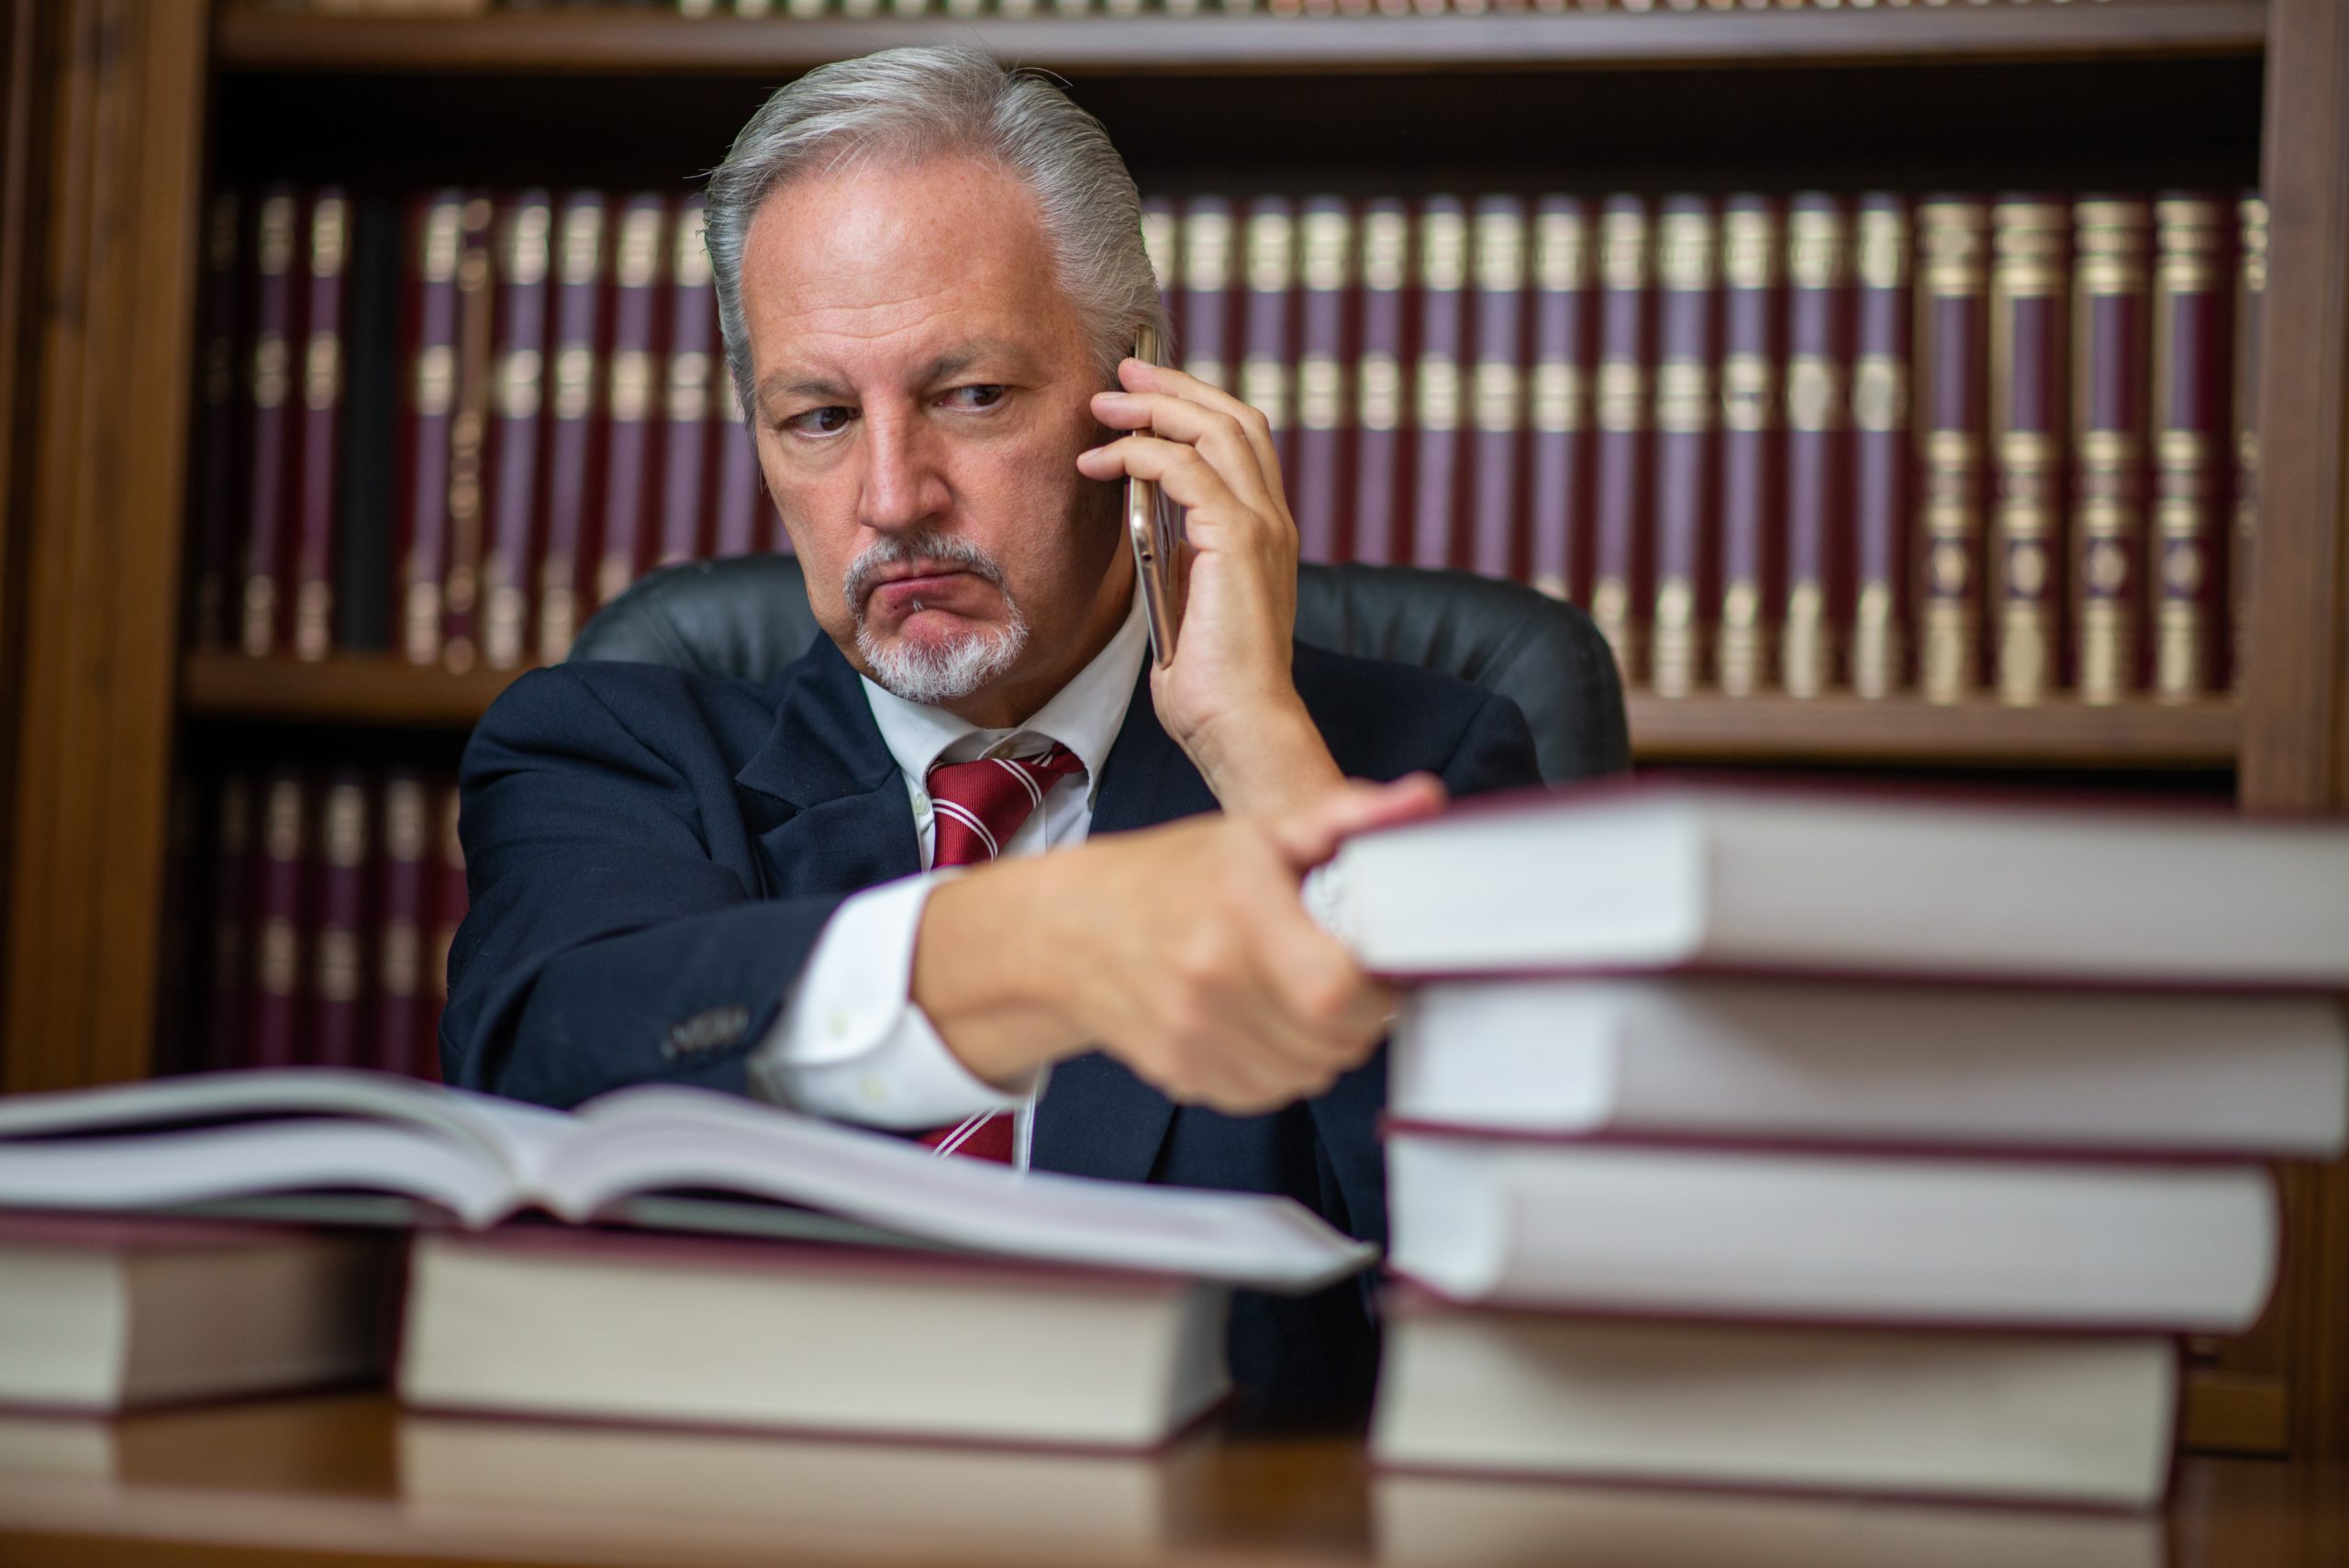 Why You Should Never Risk Your Defense by Choosing an Inexperienced Lawyer